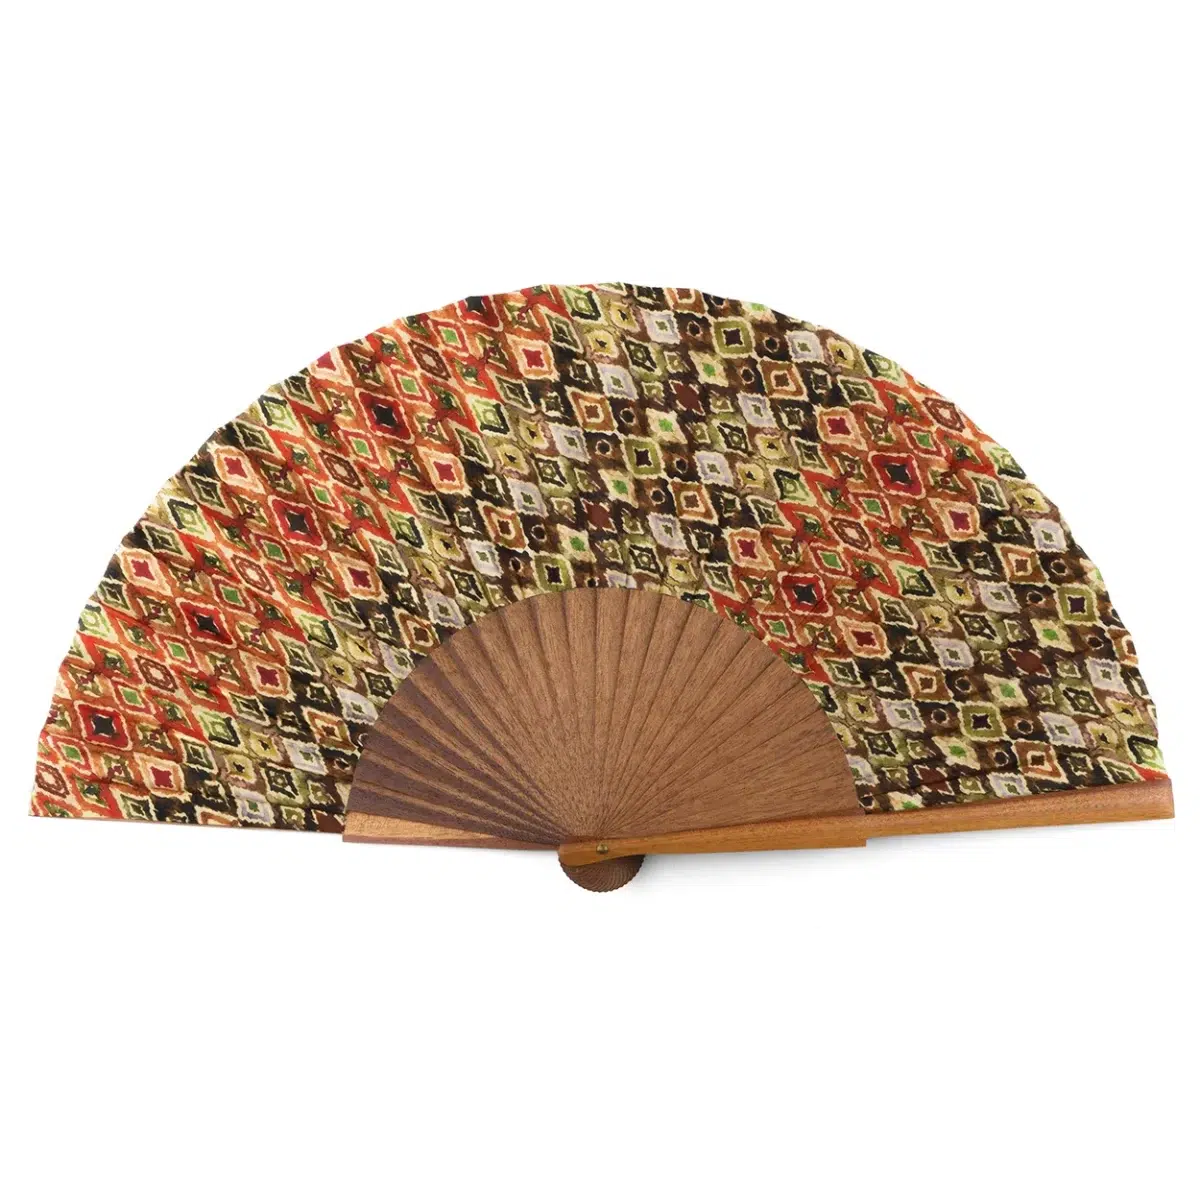 Multicolored Silk Fan with Abstract Print and Natural Wood Ribs.